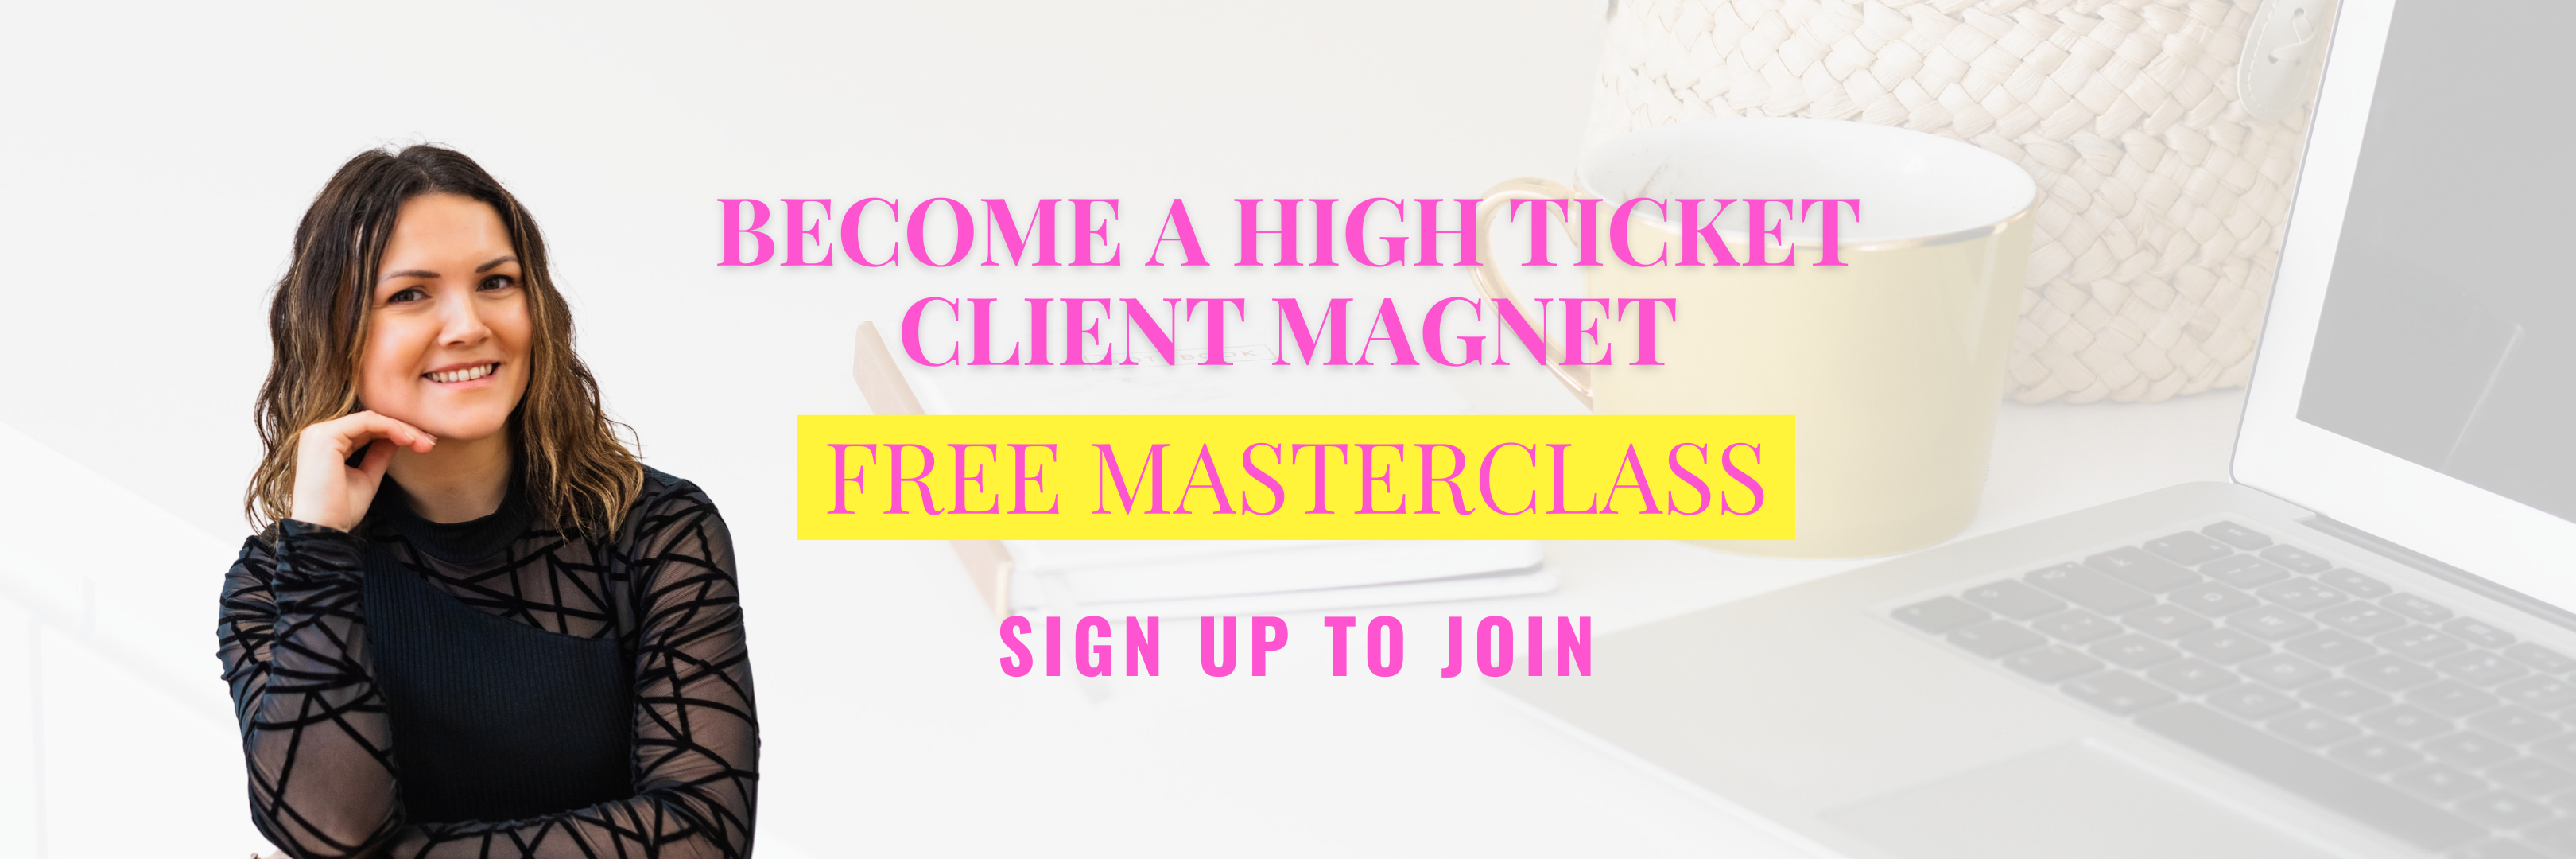 attract-your-dream-clients-sell-high-ticket-personal-brand-strategy-free-masterclass